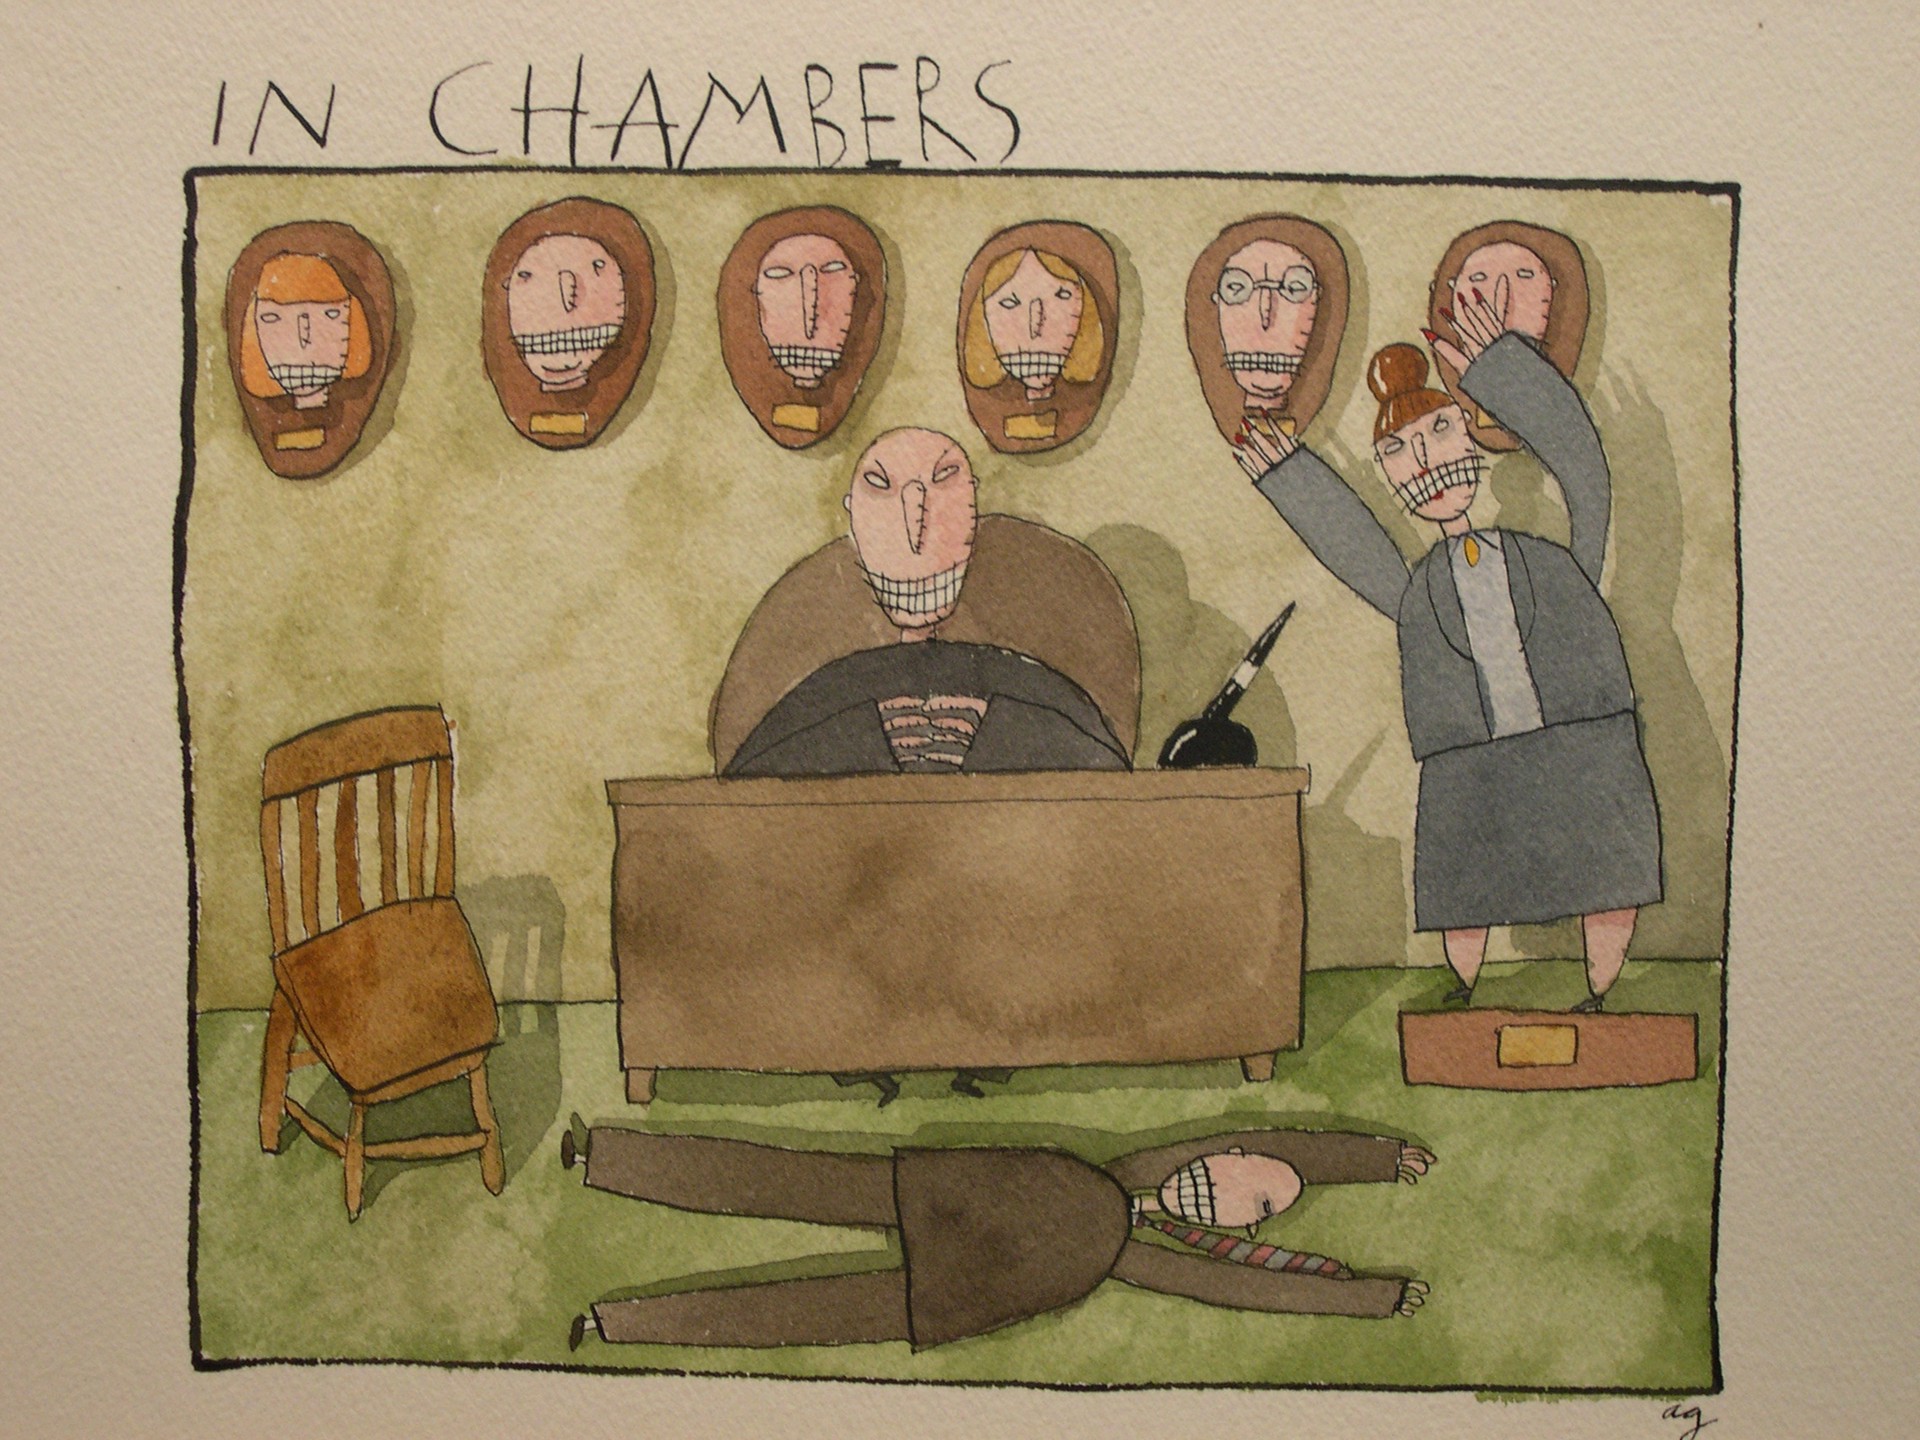 In Chambers by Alan Gerson